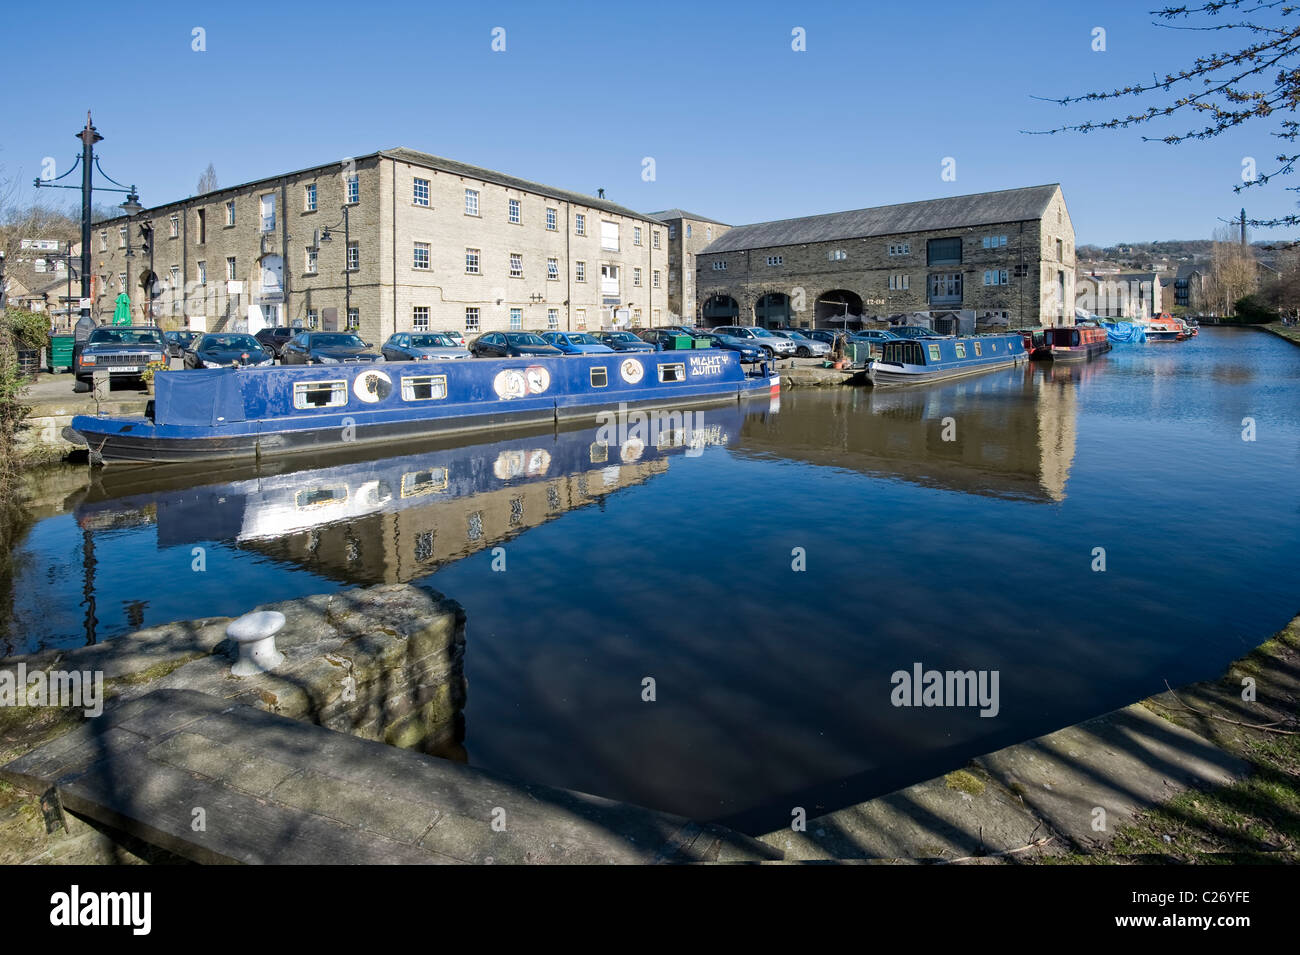 Canal boats in springtime on the rochdale canal at moorings at sowerby bridge basin nr halifax, calderdale. Stock Photo